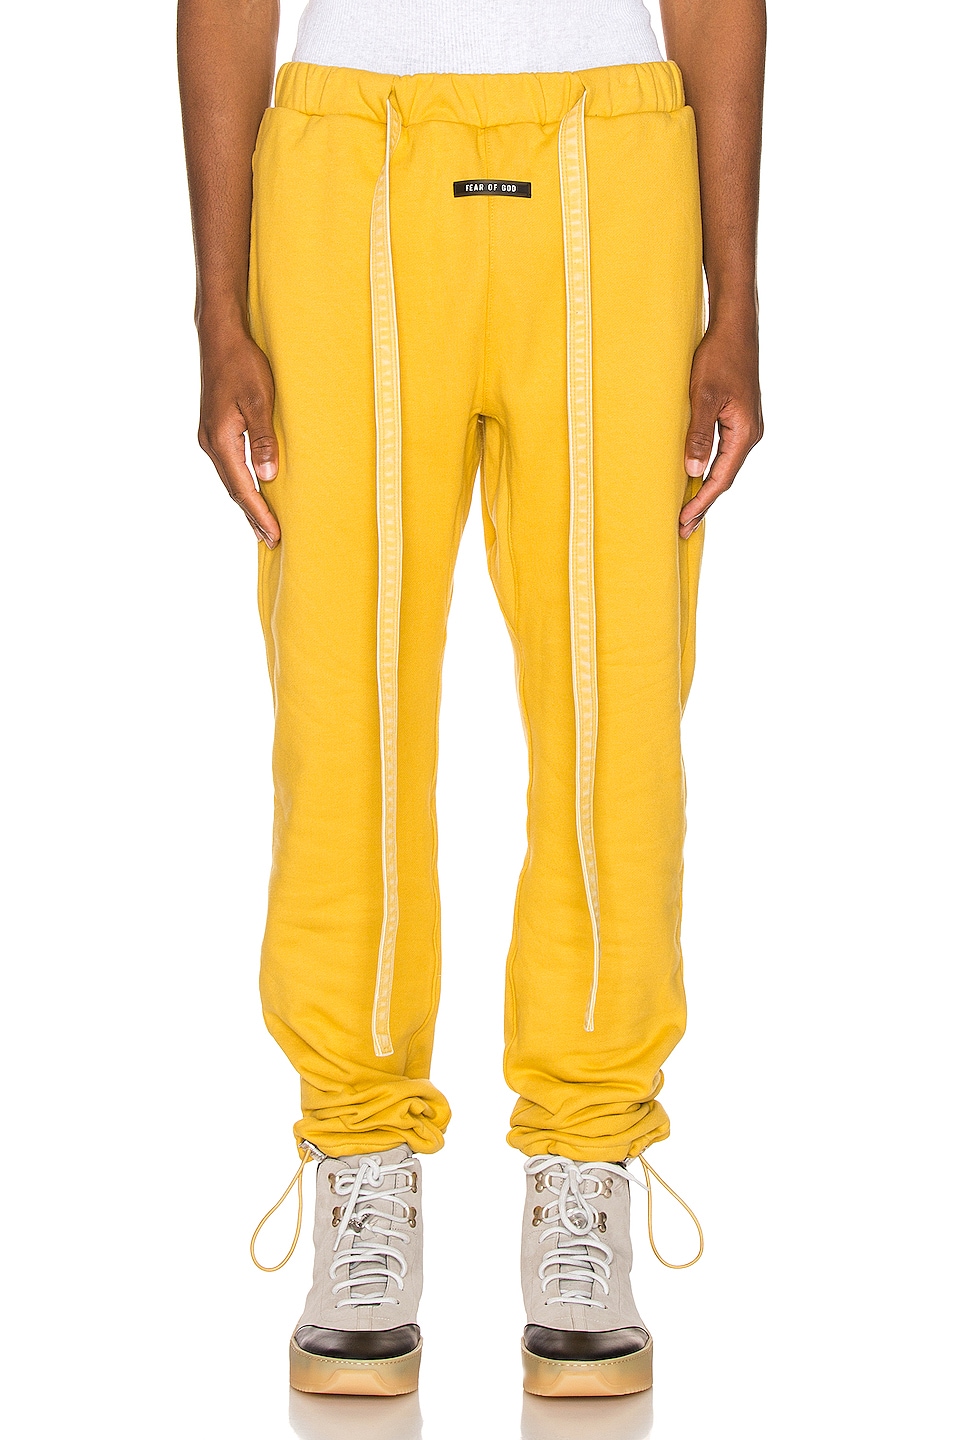 Image 1 of Fear of God Core Sweatpant in Garden Glove Yellow